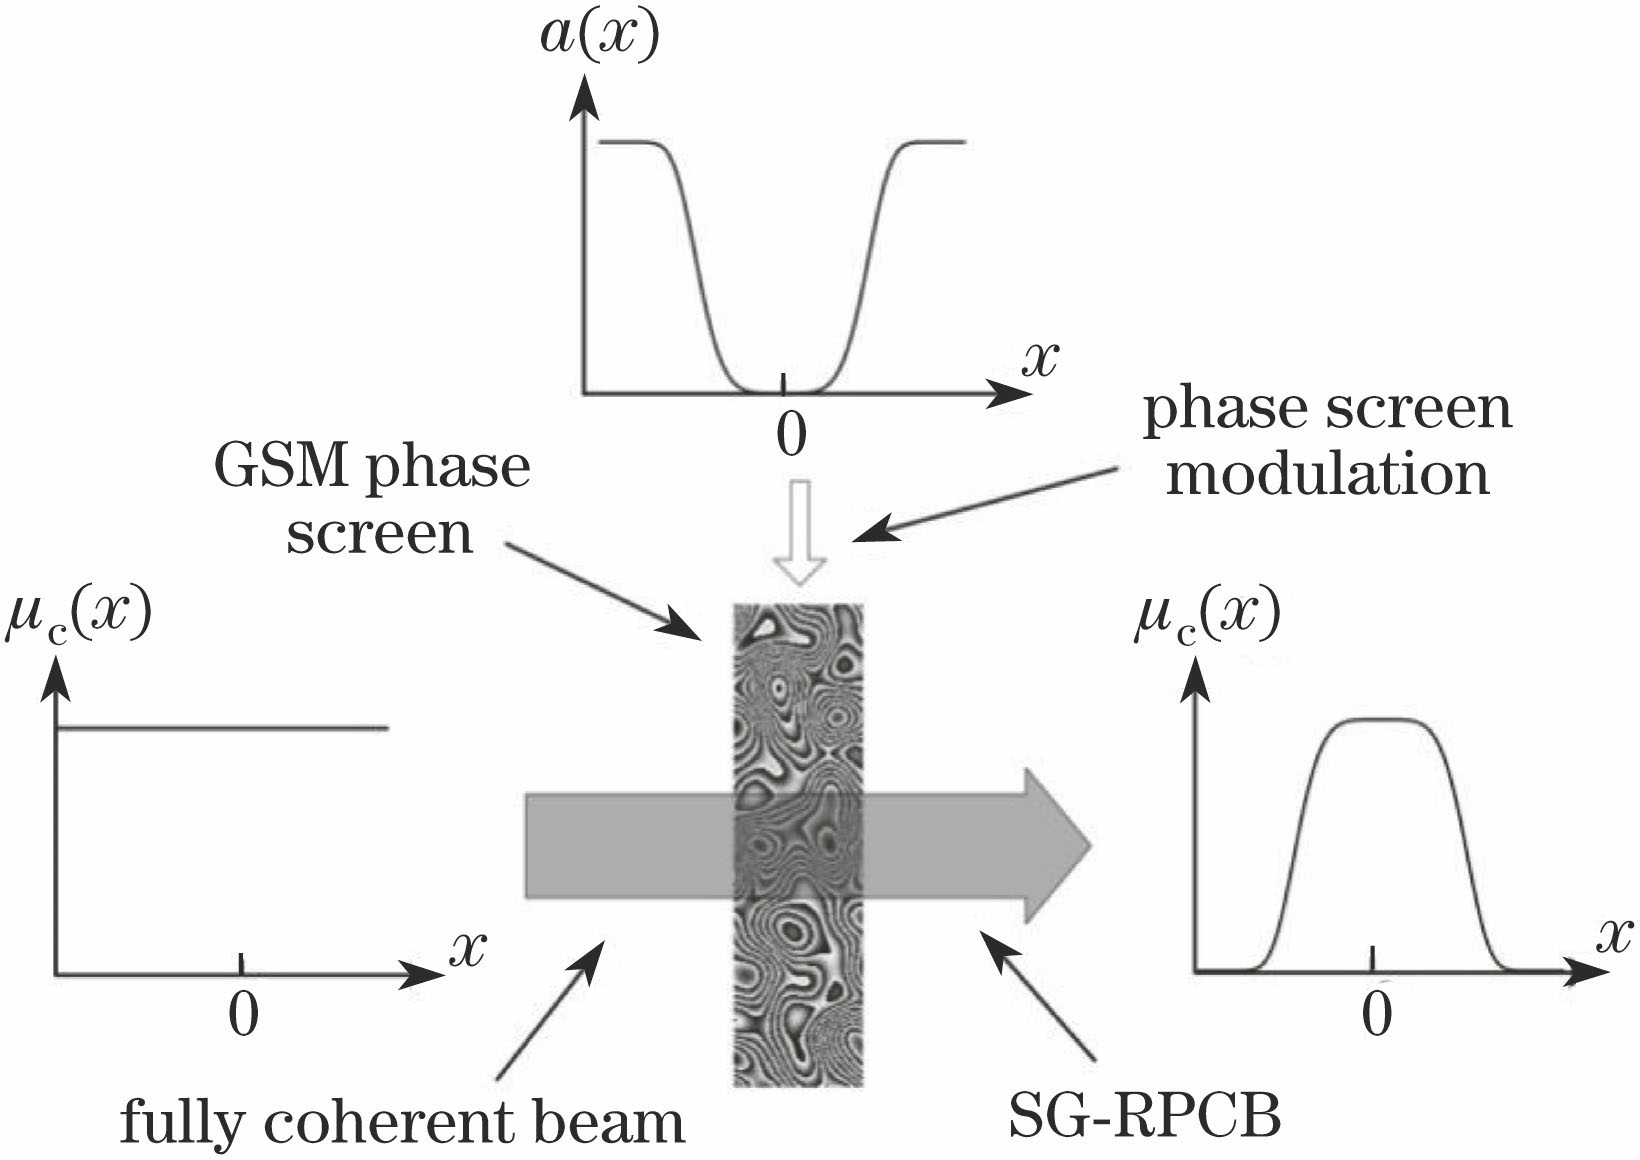 Schematic for synthesizing SG-RPCB